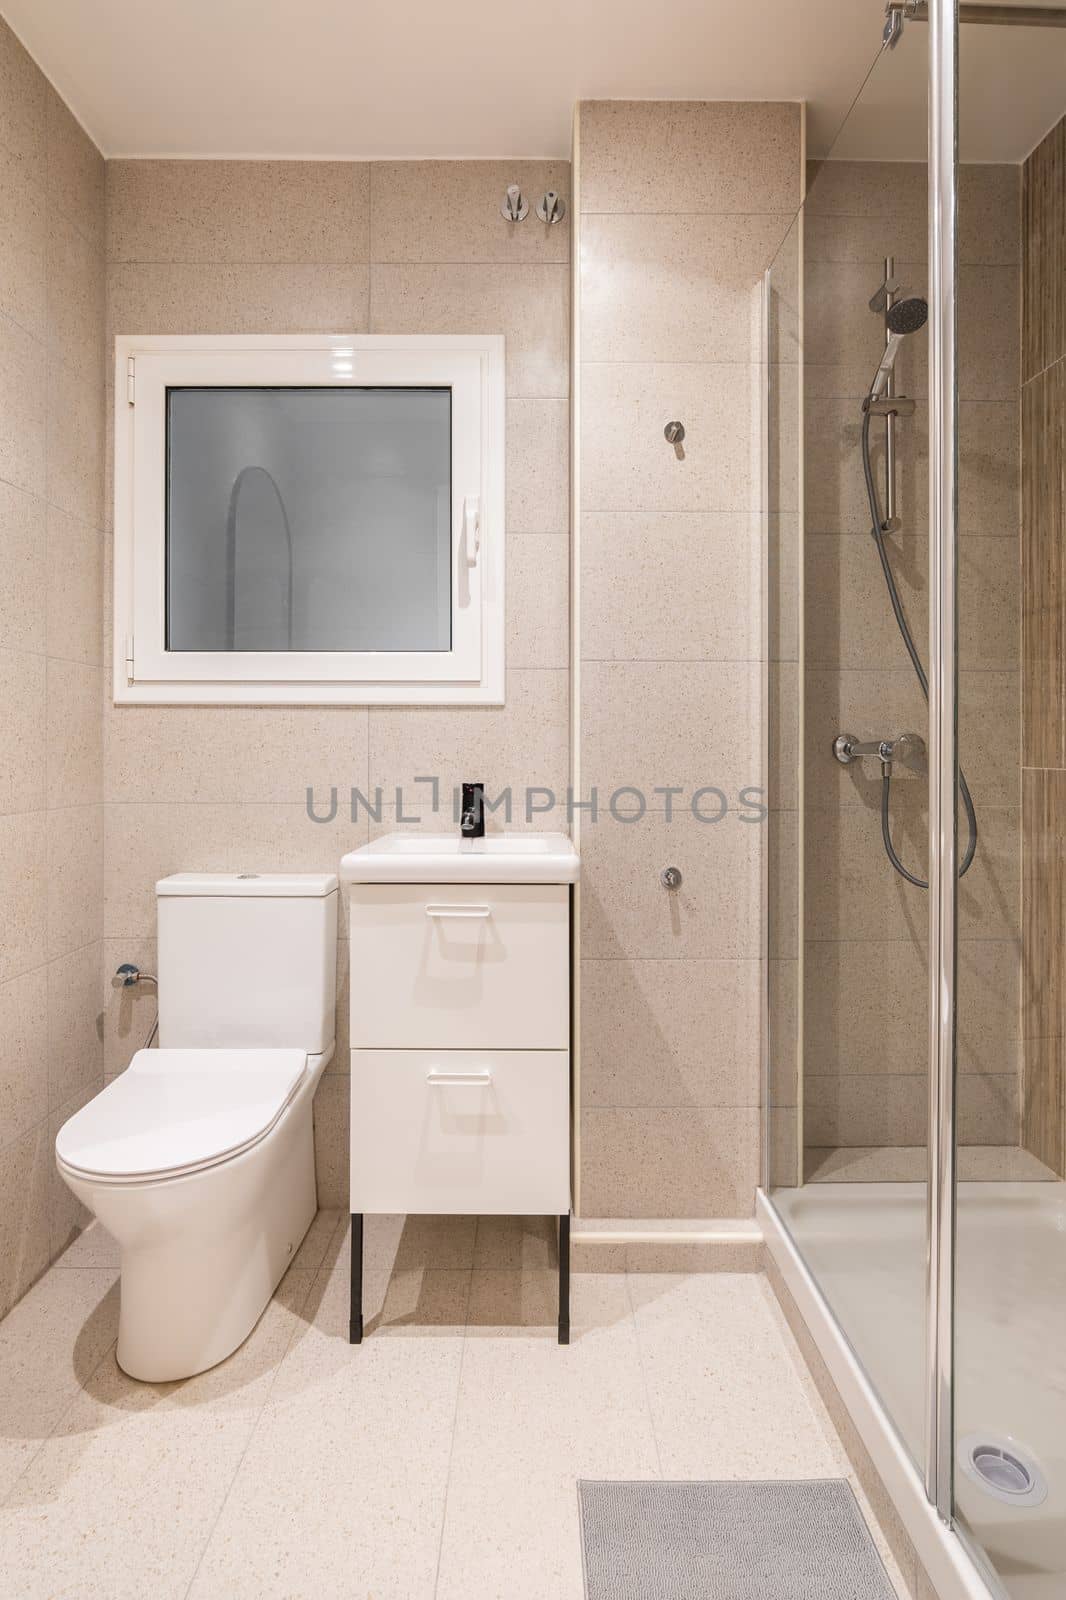 Bathroom with small shower area enclosed by transparent glass wall. Washbasin on furniture with drawers for bathroom accessories. Window in wall with frosted glass and white frame